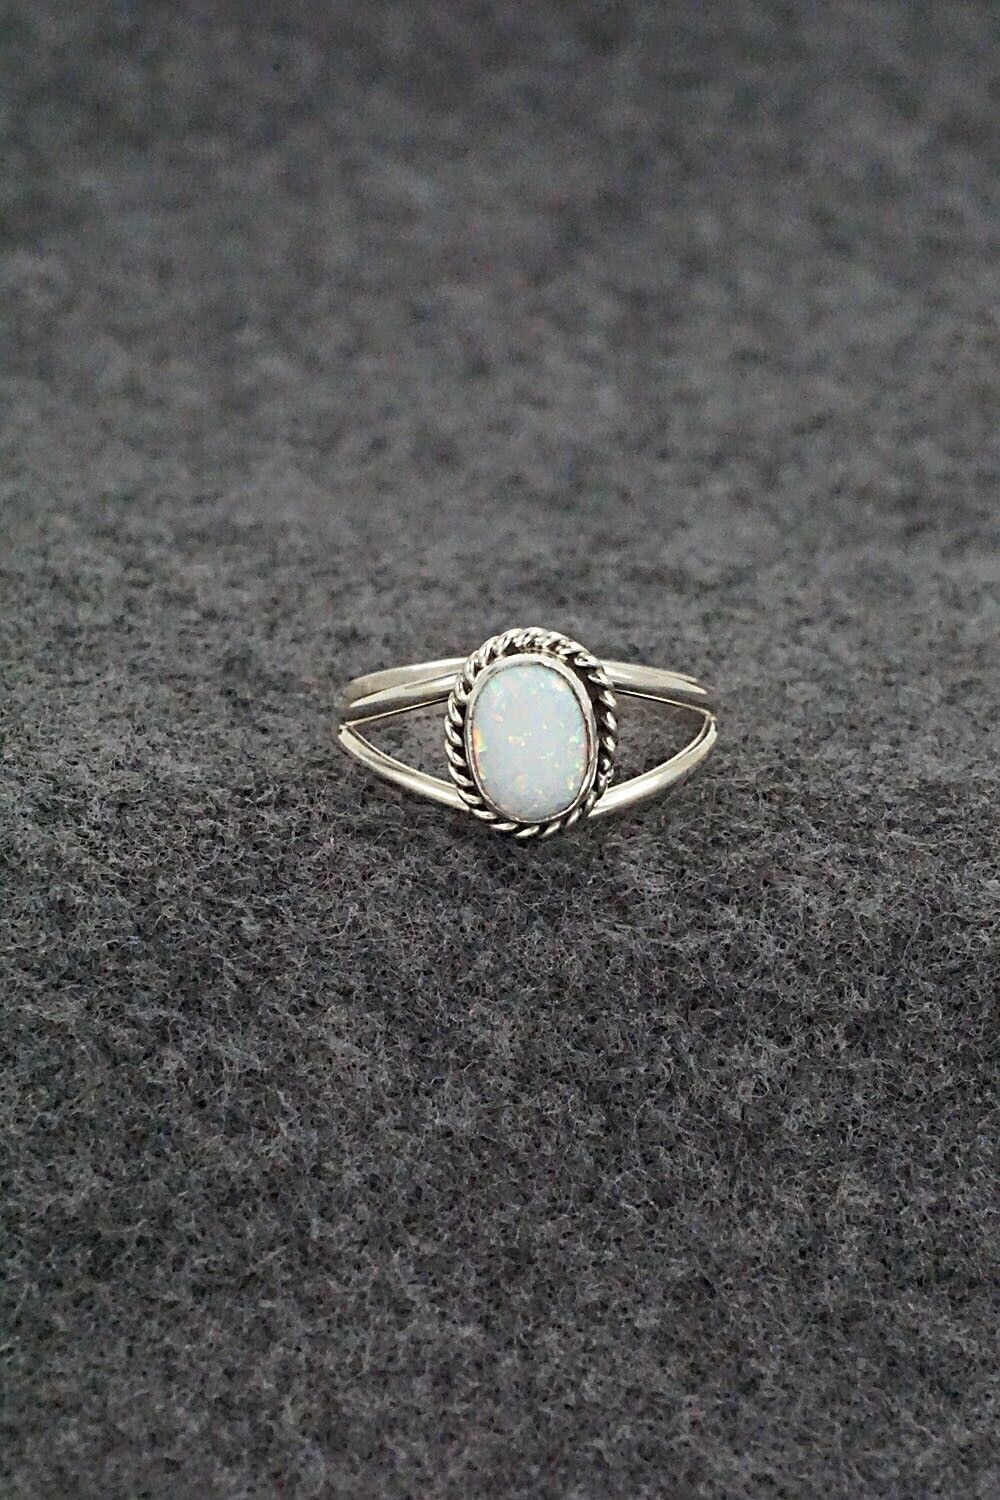 Opalite & Sterling Silver Ring - Jan Mariano - Size 7.5